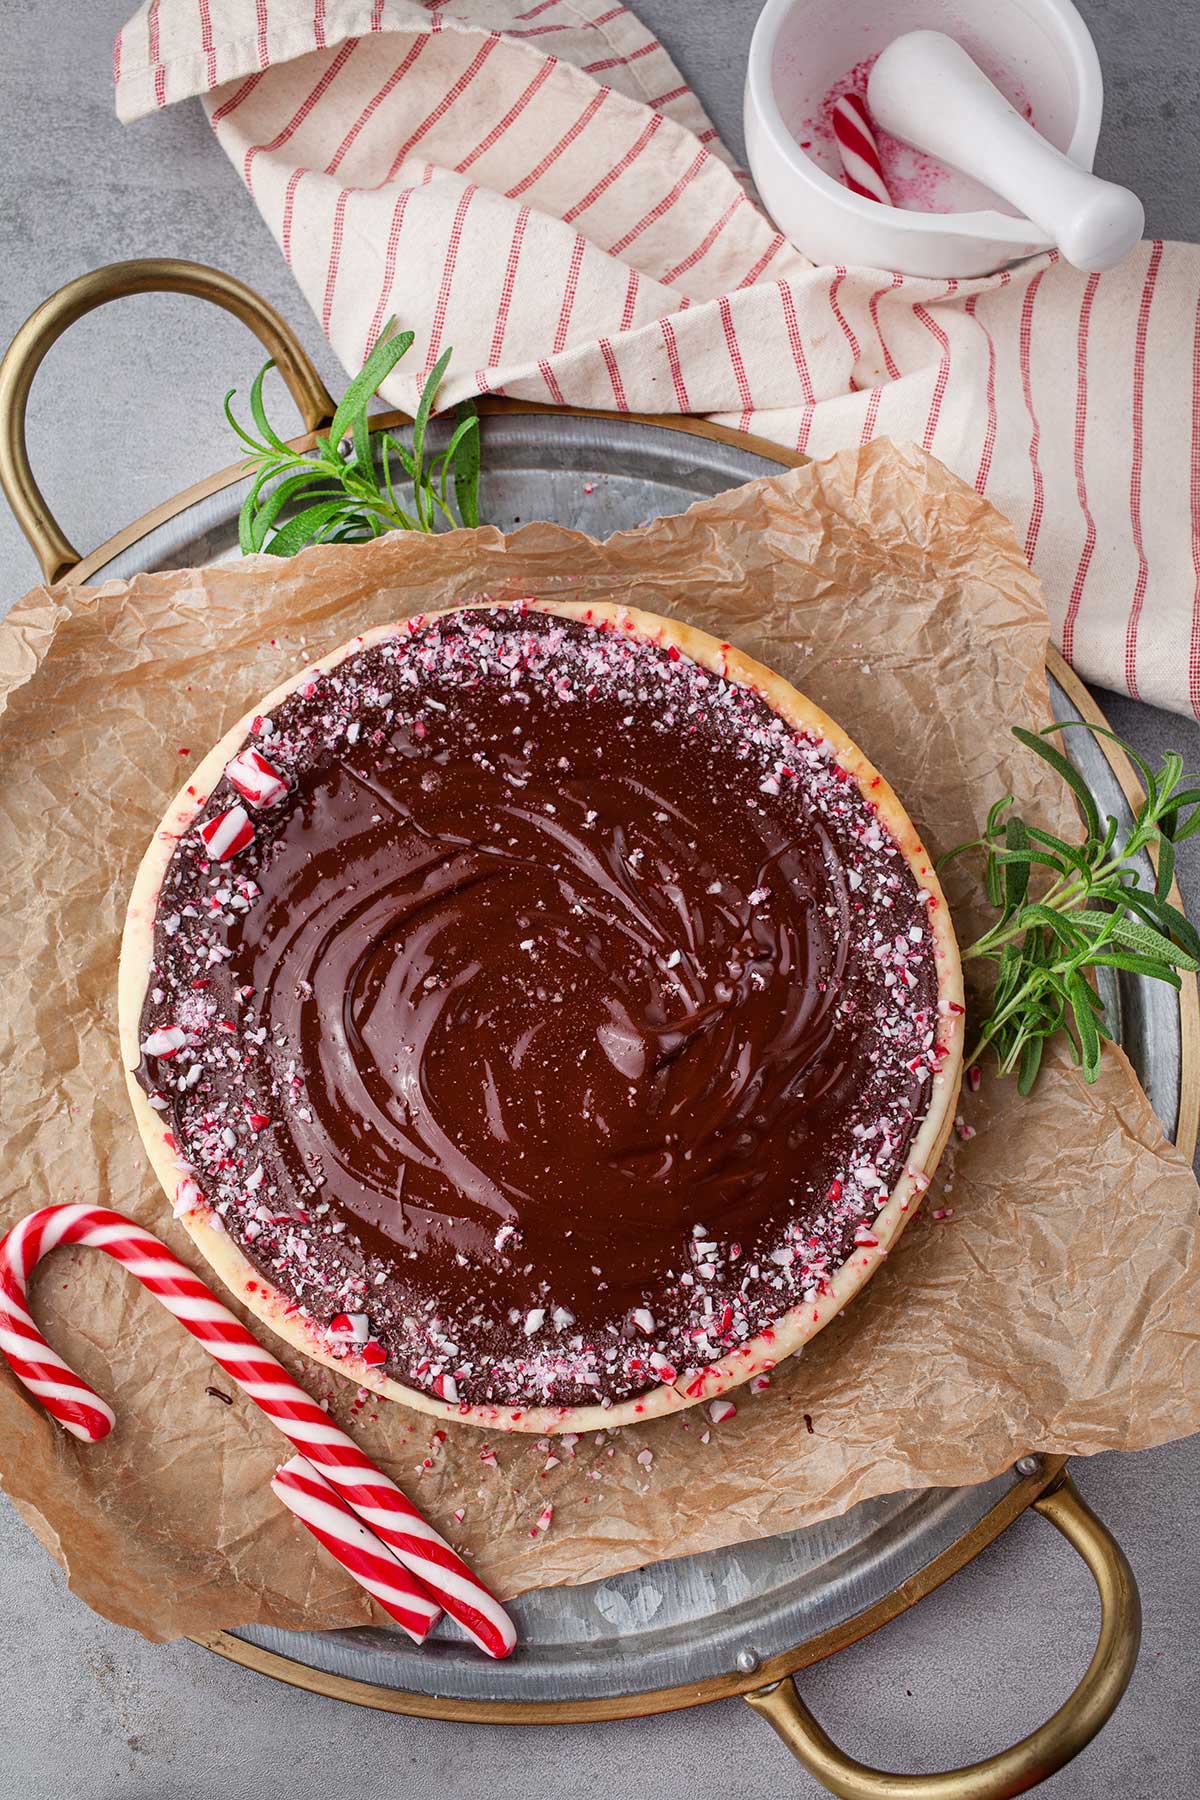 Peppermint Cheesecake with candy cane